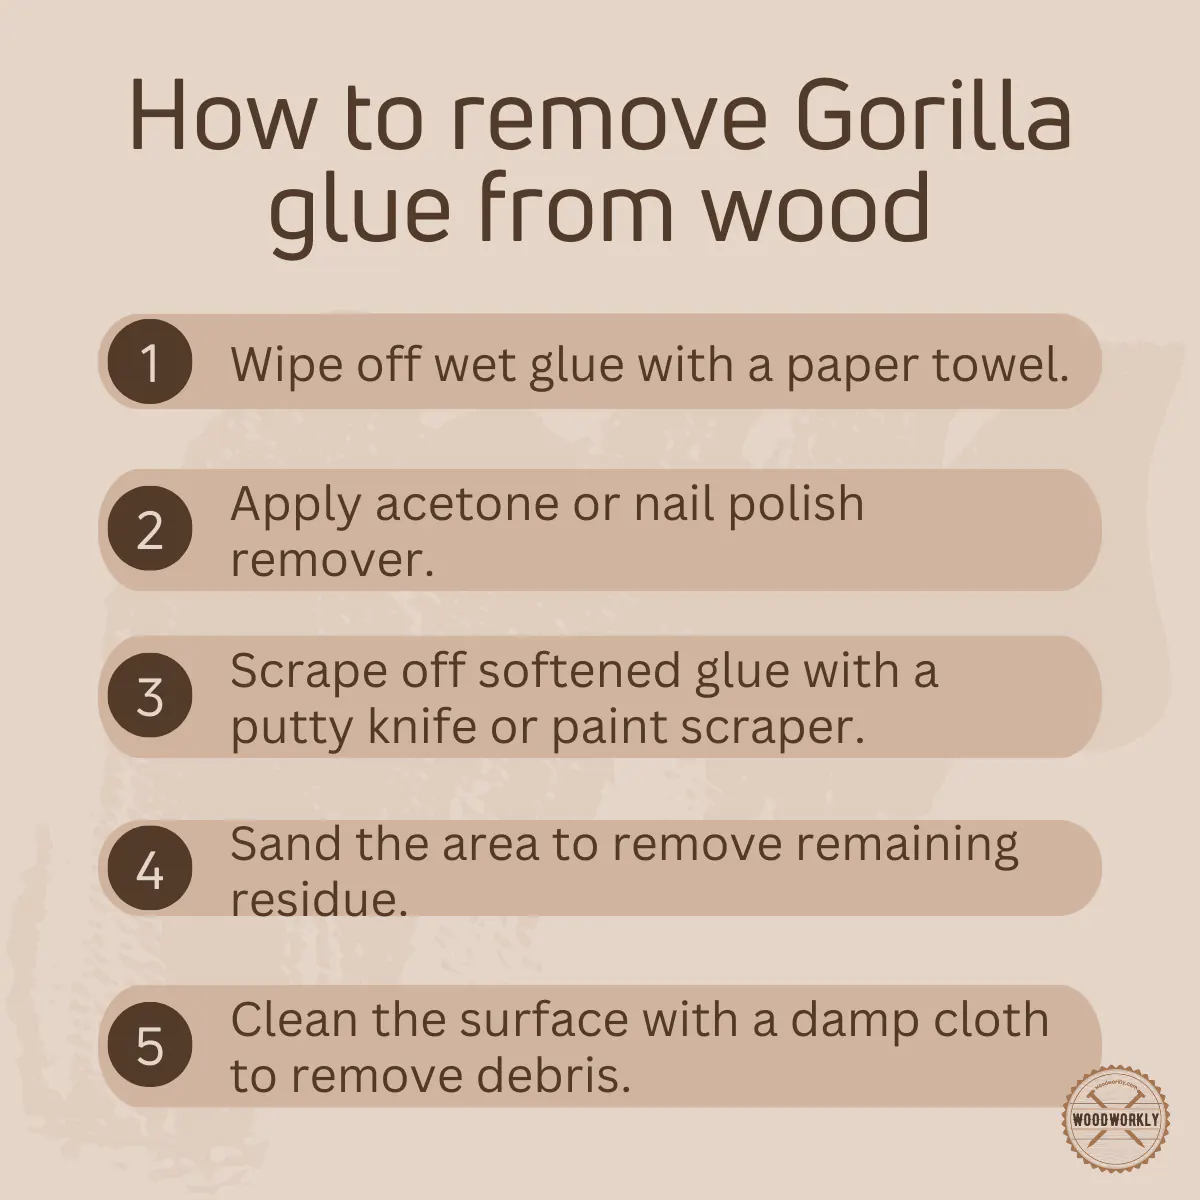 How to remove Gorilla glue from wood